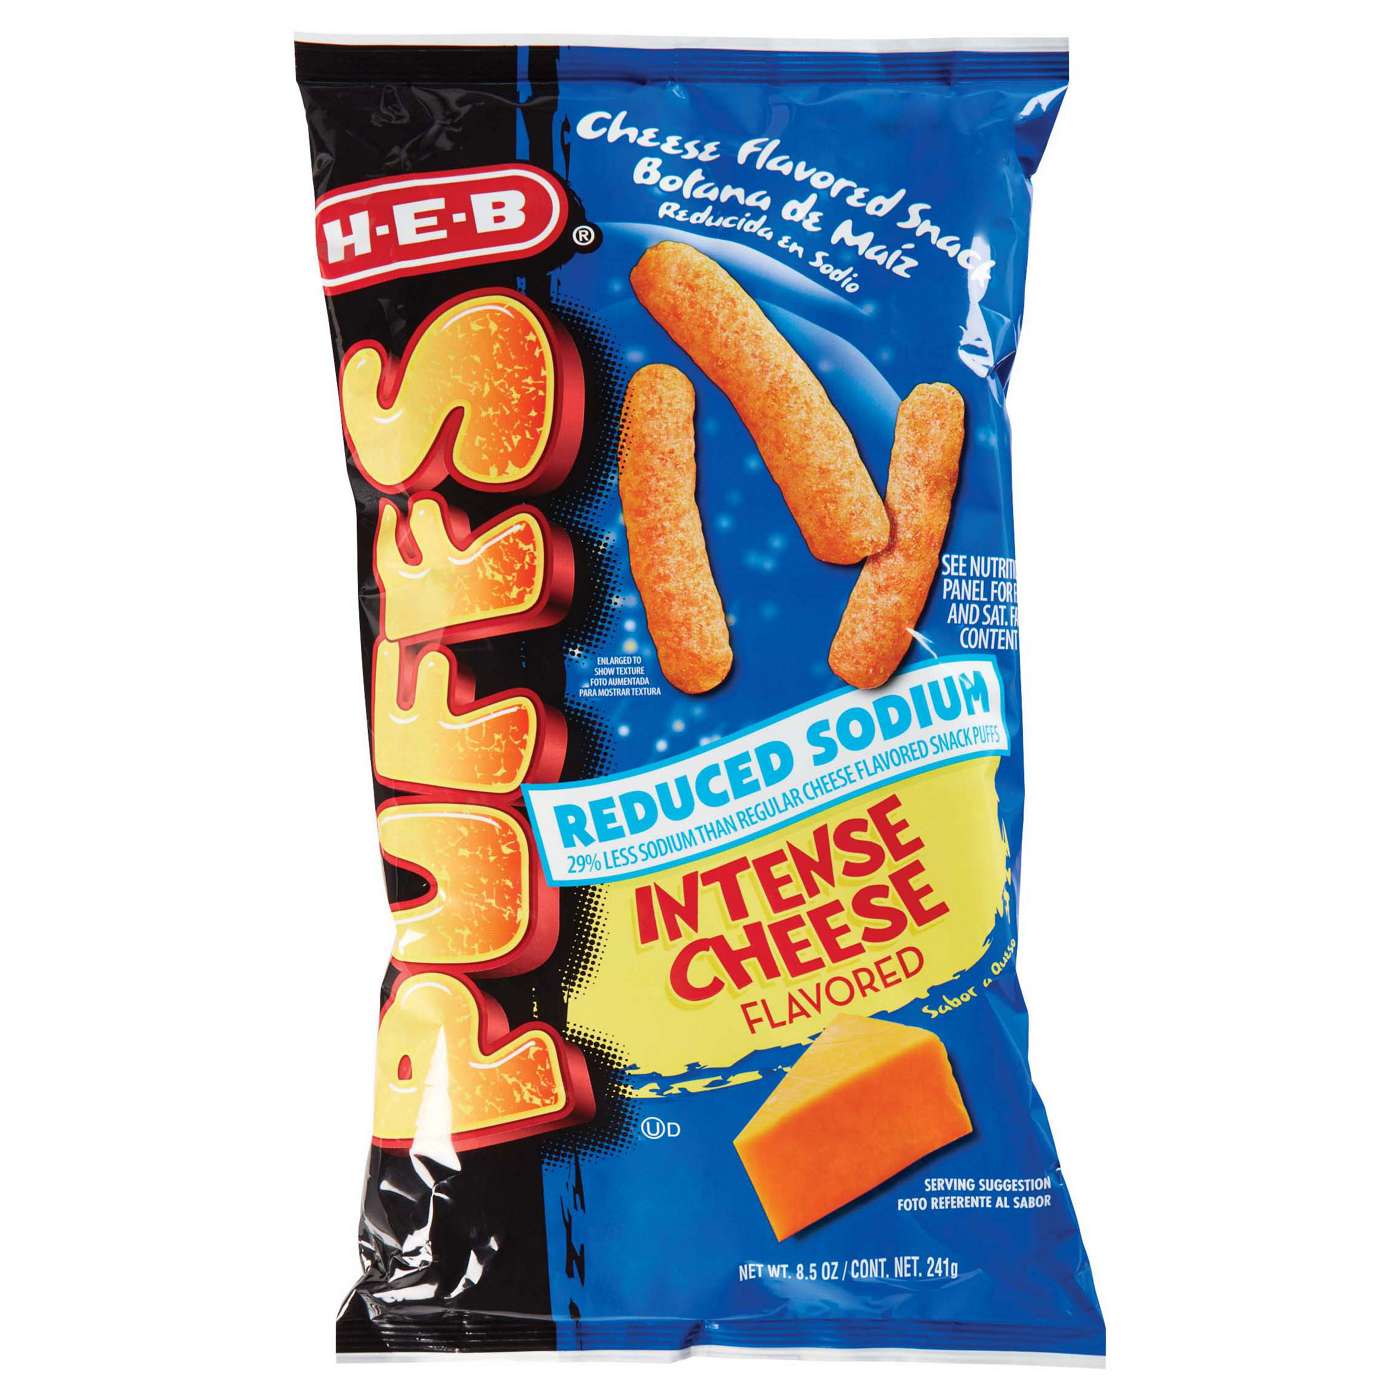 H-E-B Intense Cheese-Flavored Cheese Puffs - Reduced Sodium; image 1 of 2